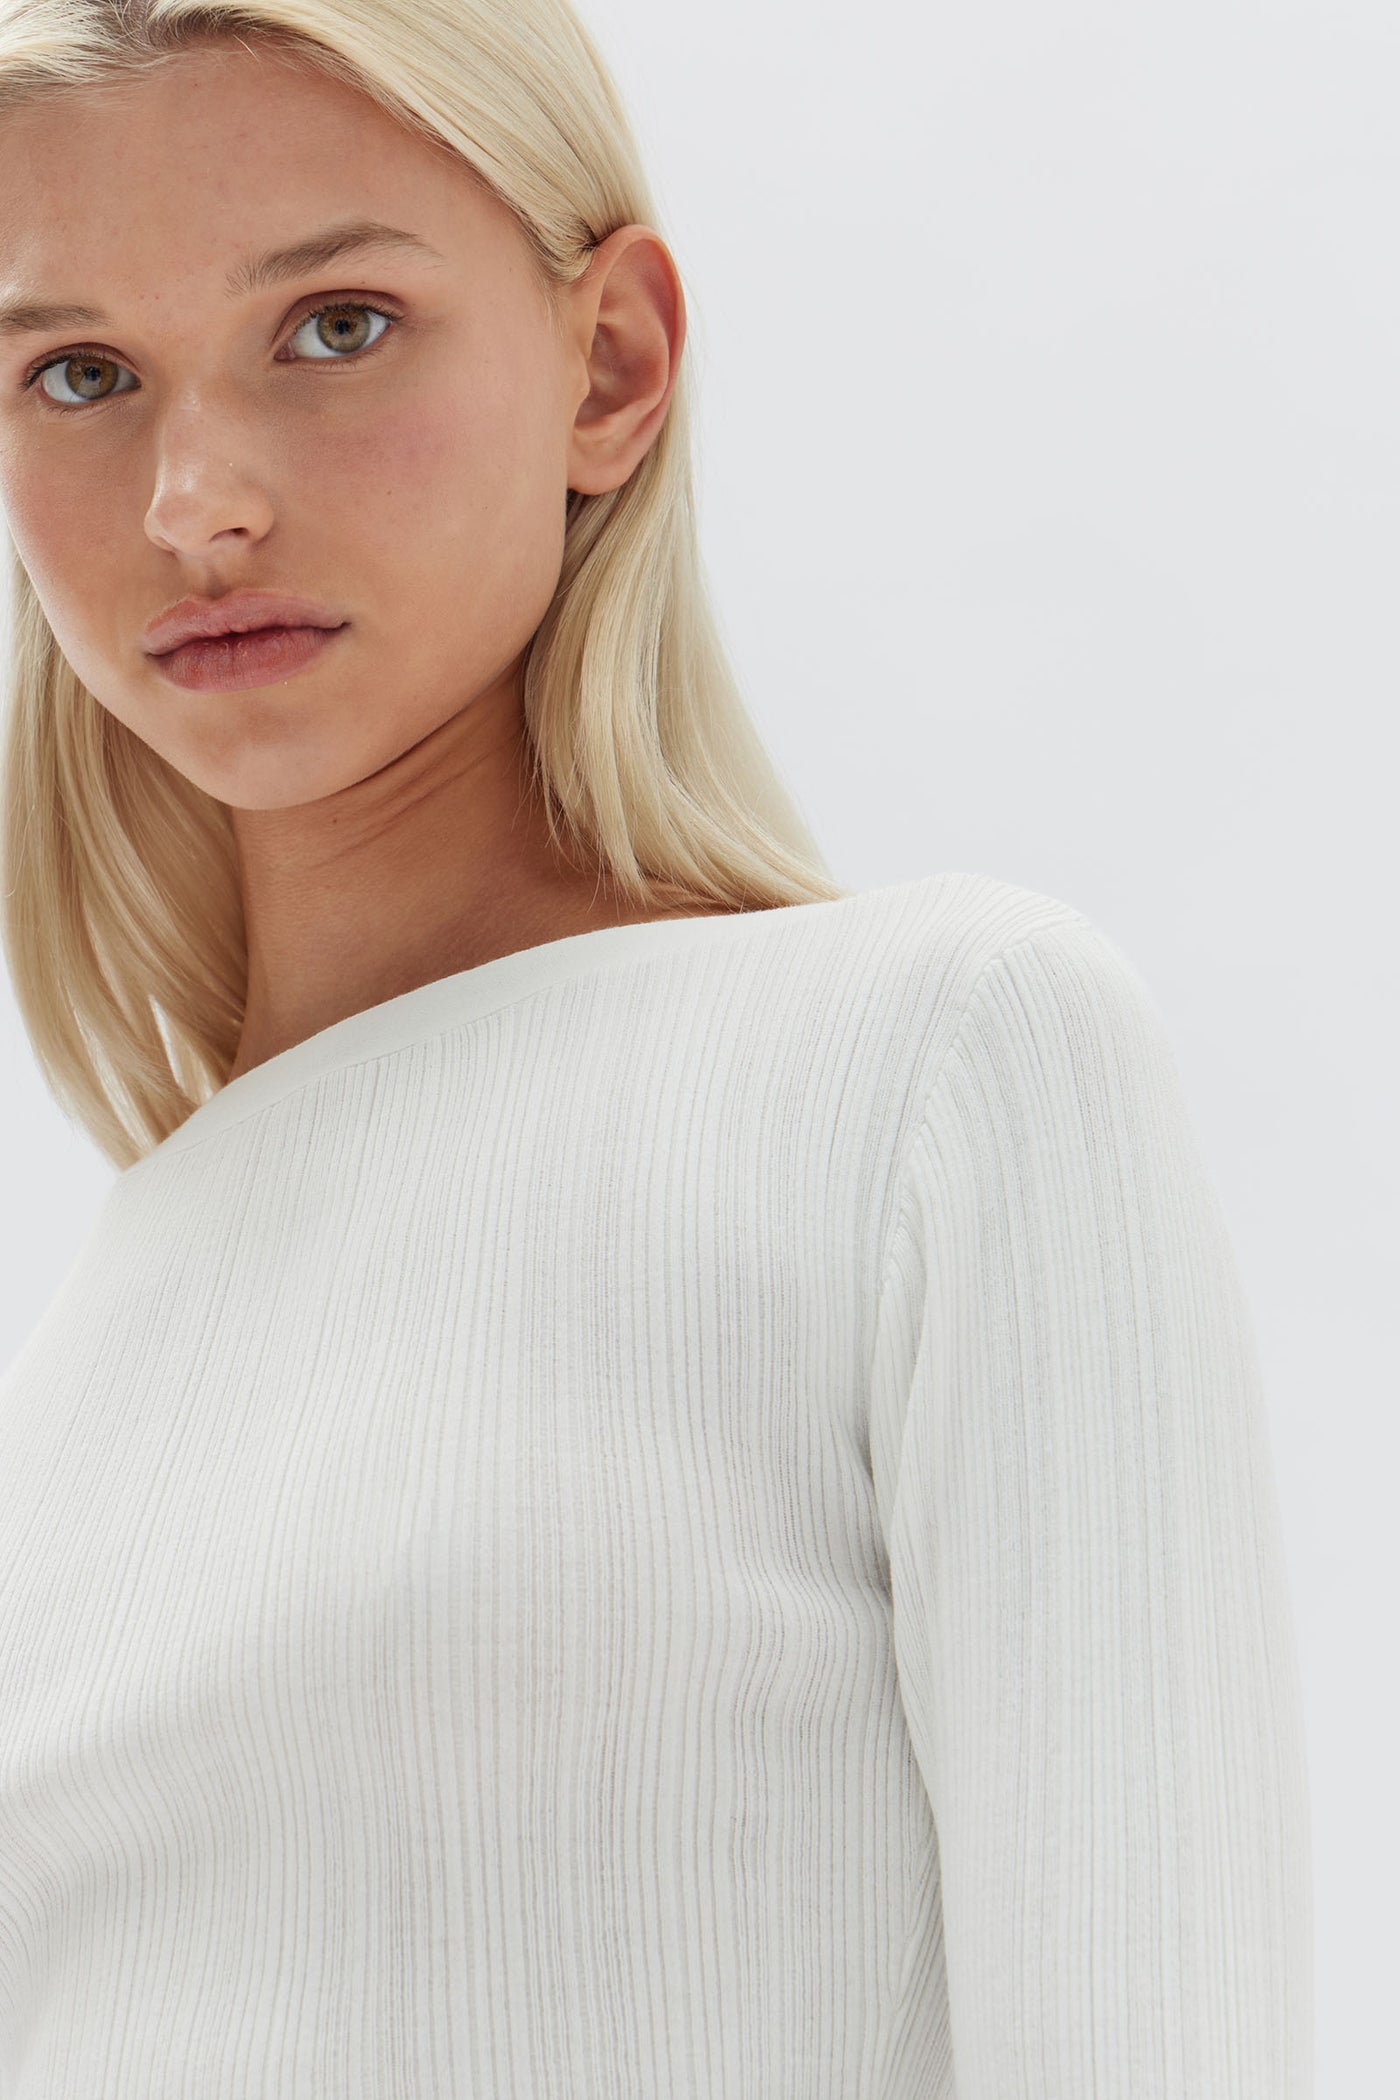 Assembly Label Vienna Knit Long Sleeve Top